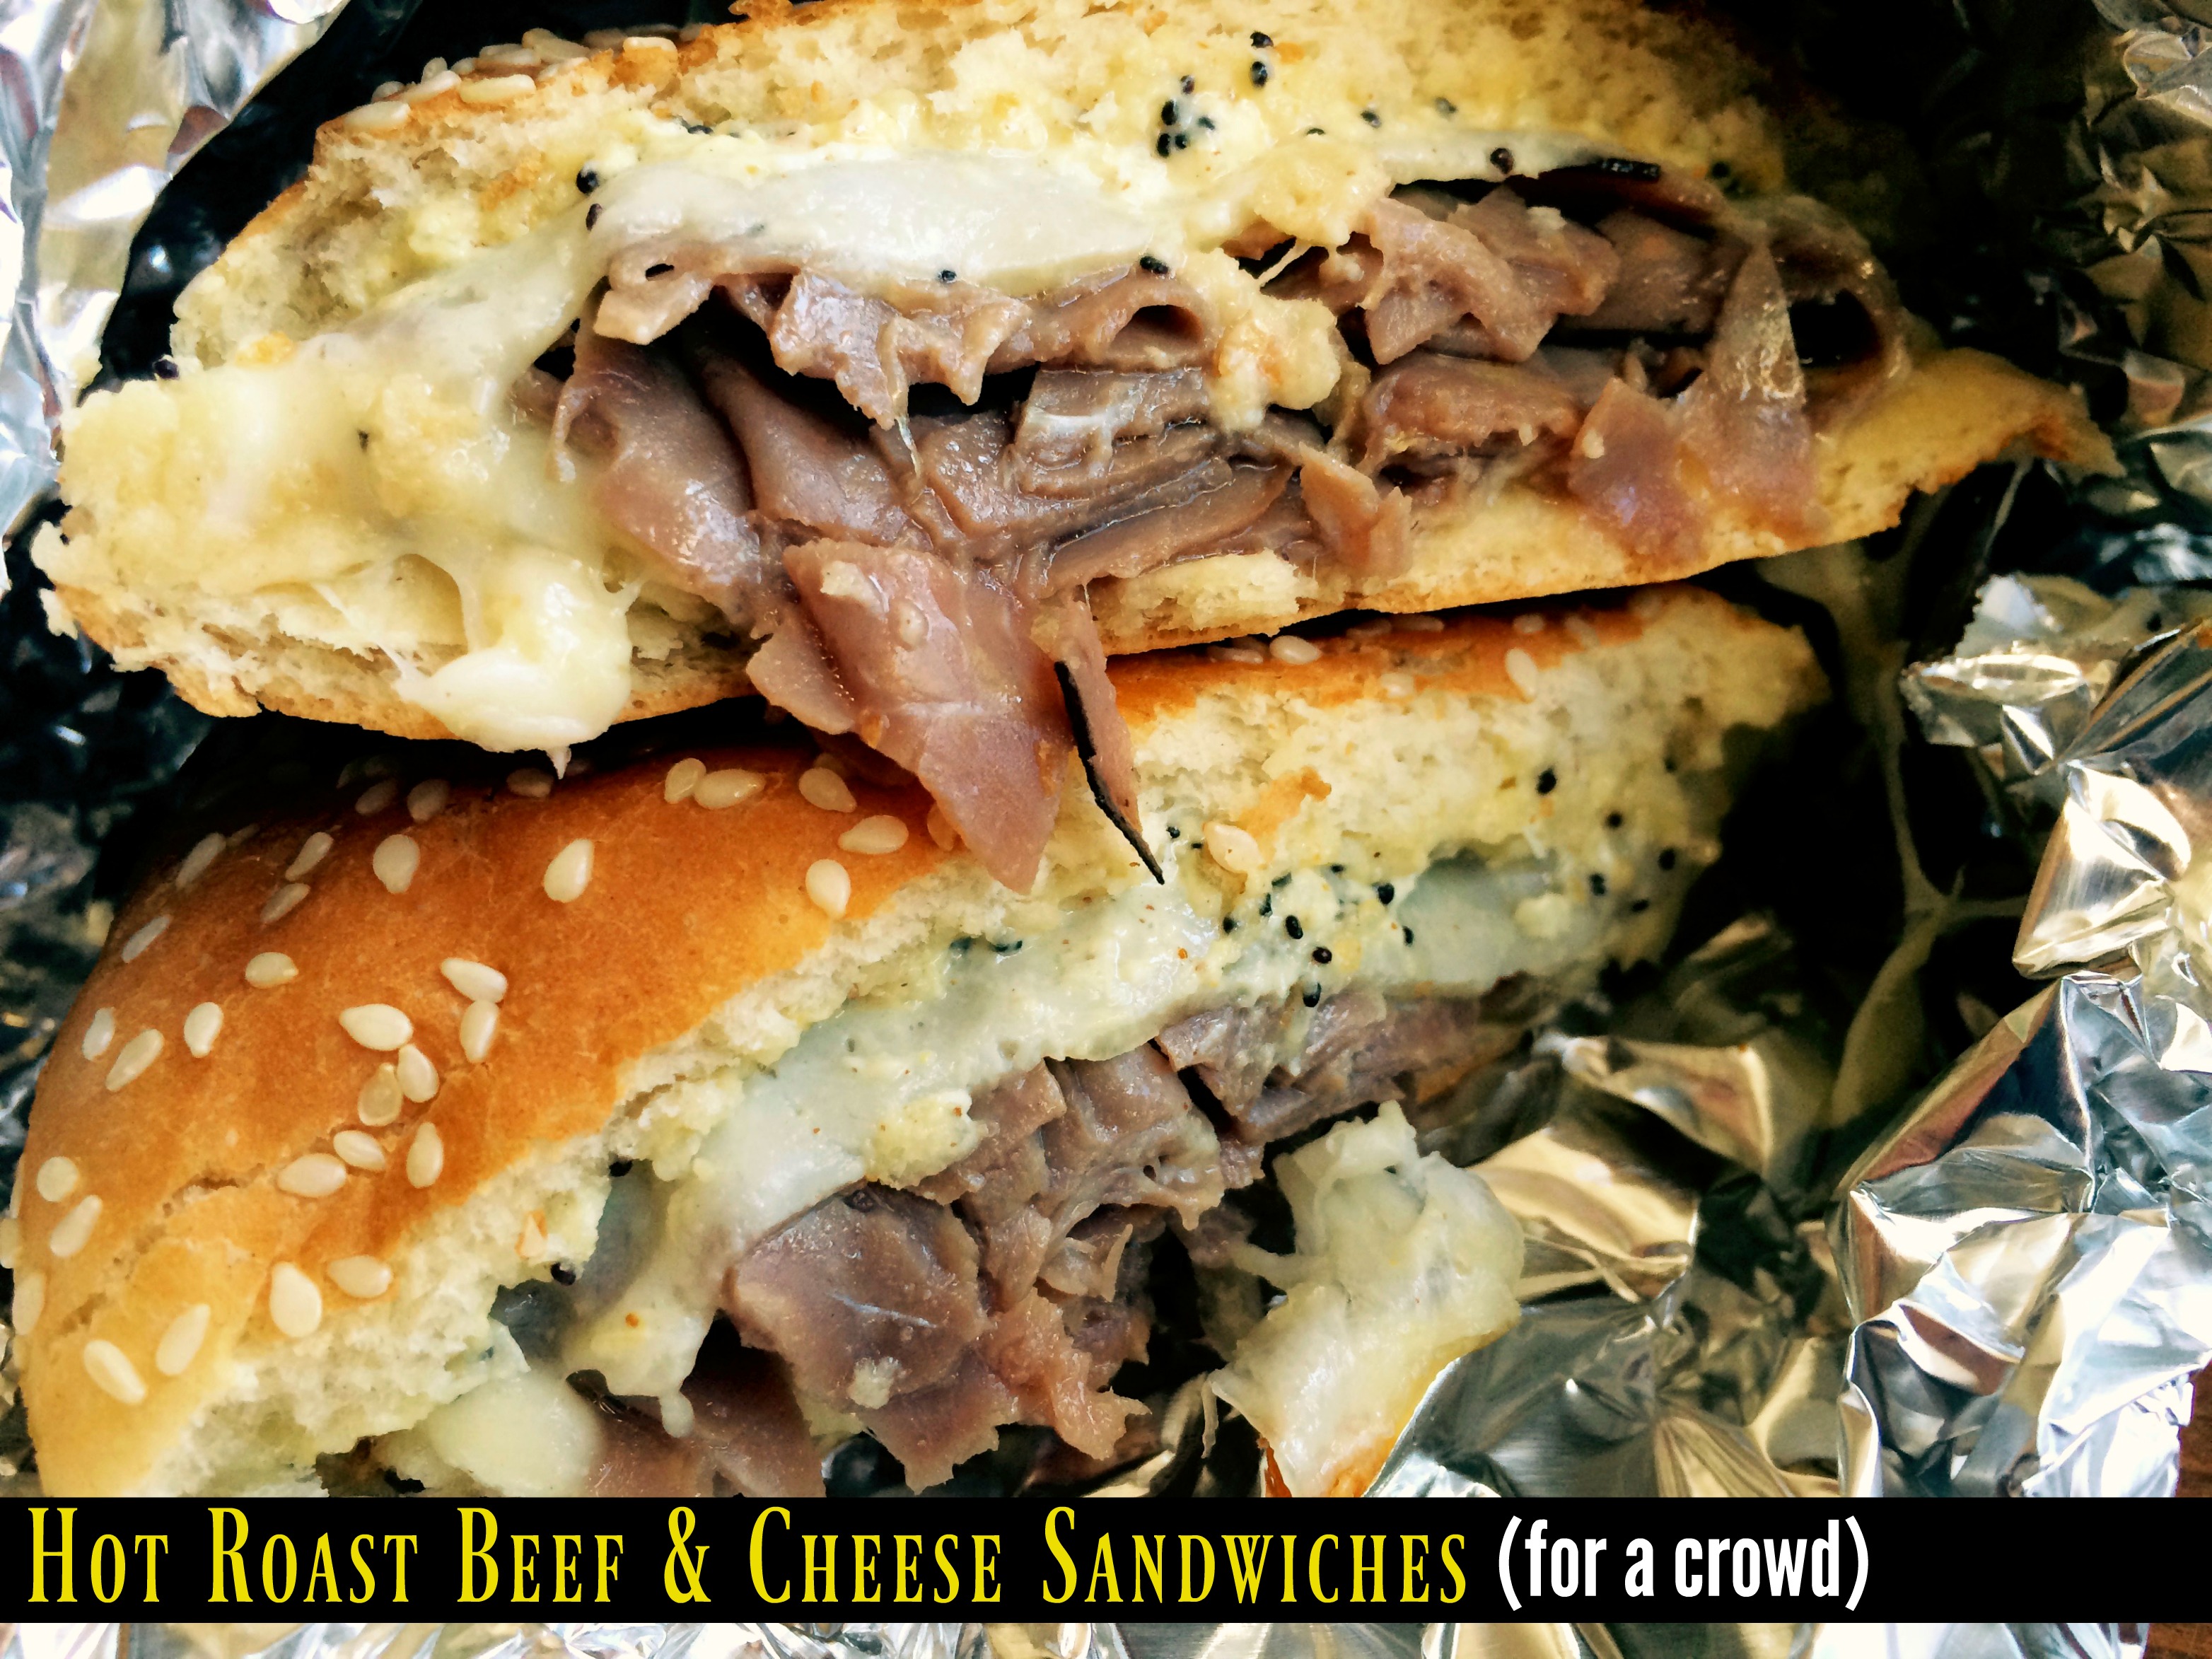 Hot Roast Beef & Cheese Sandwiches (for a crowd!)